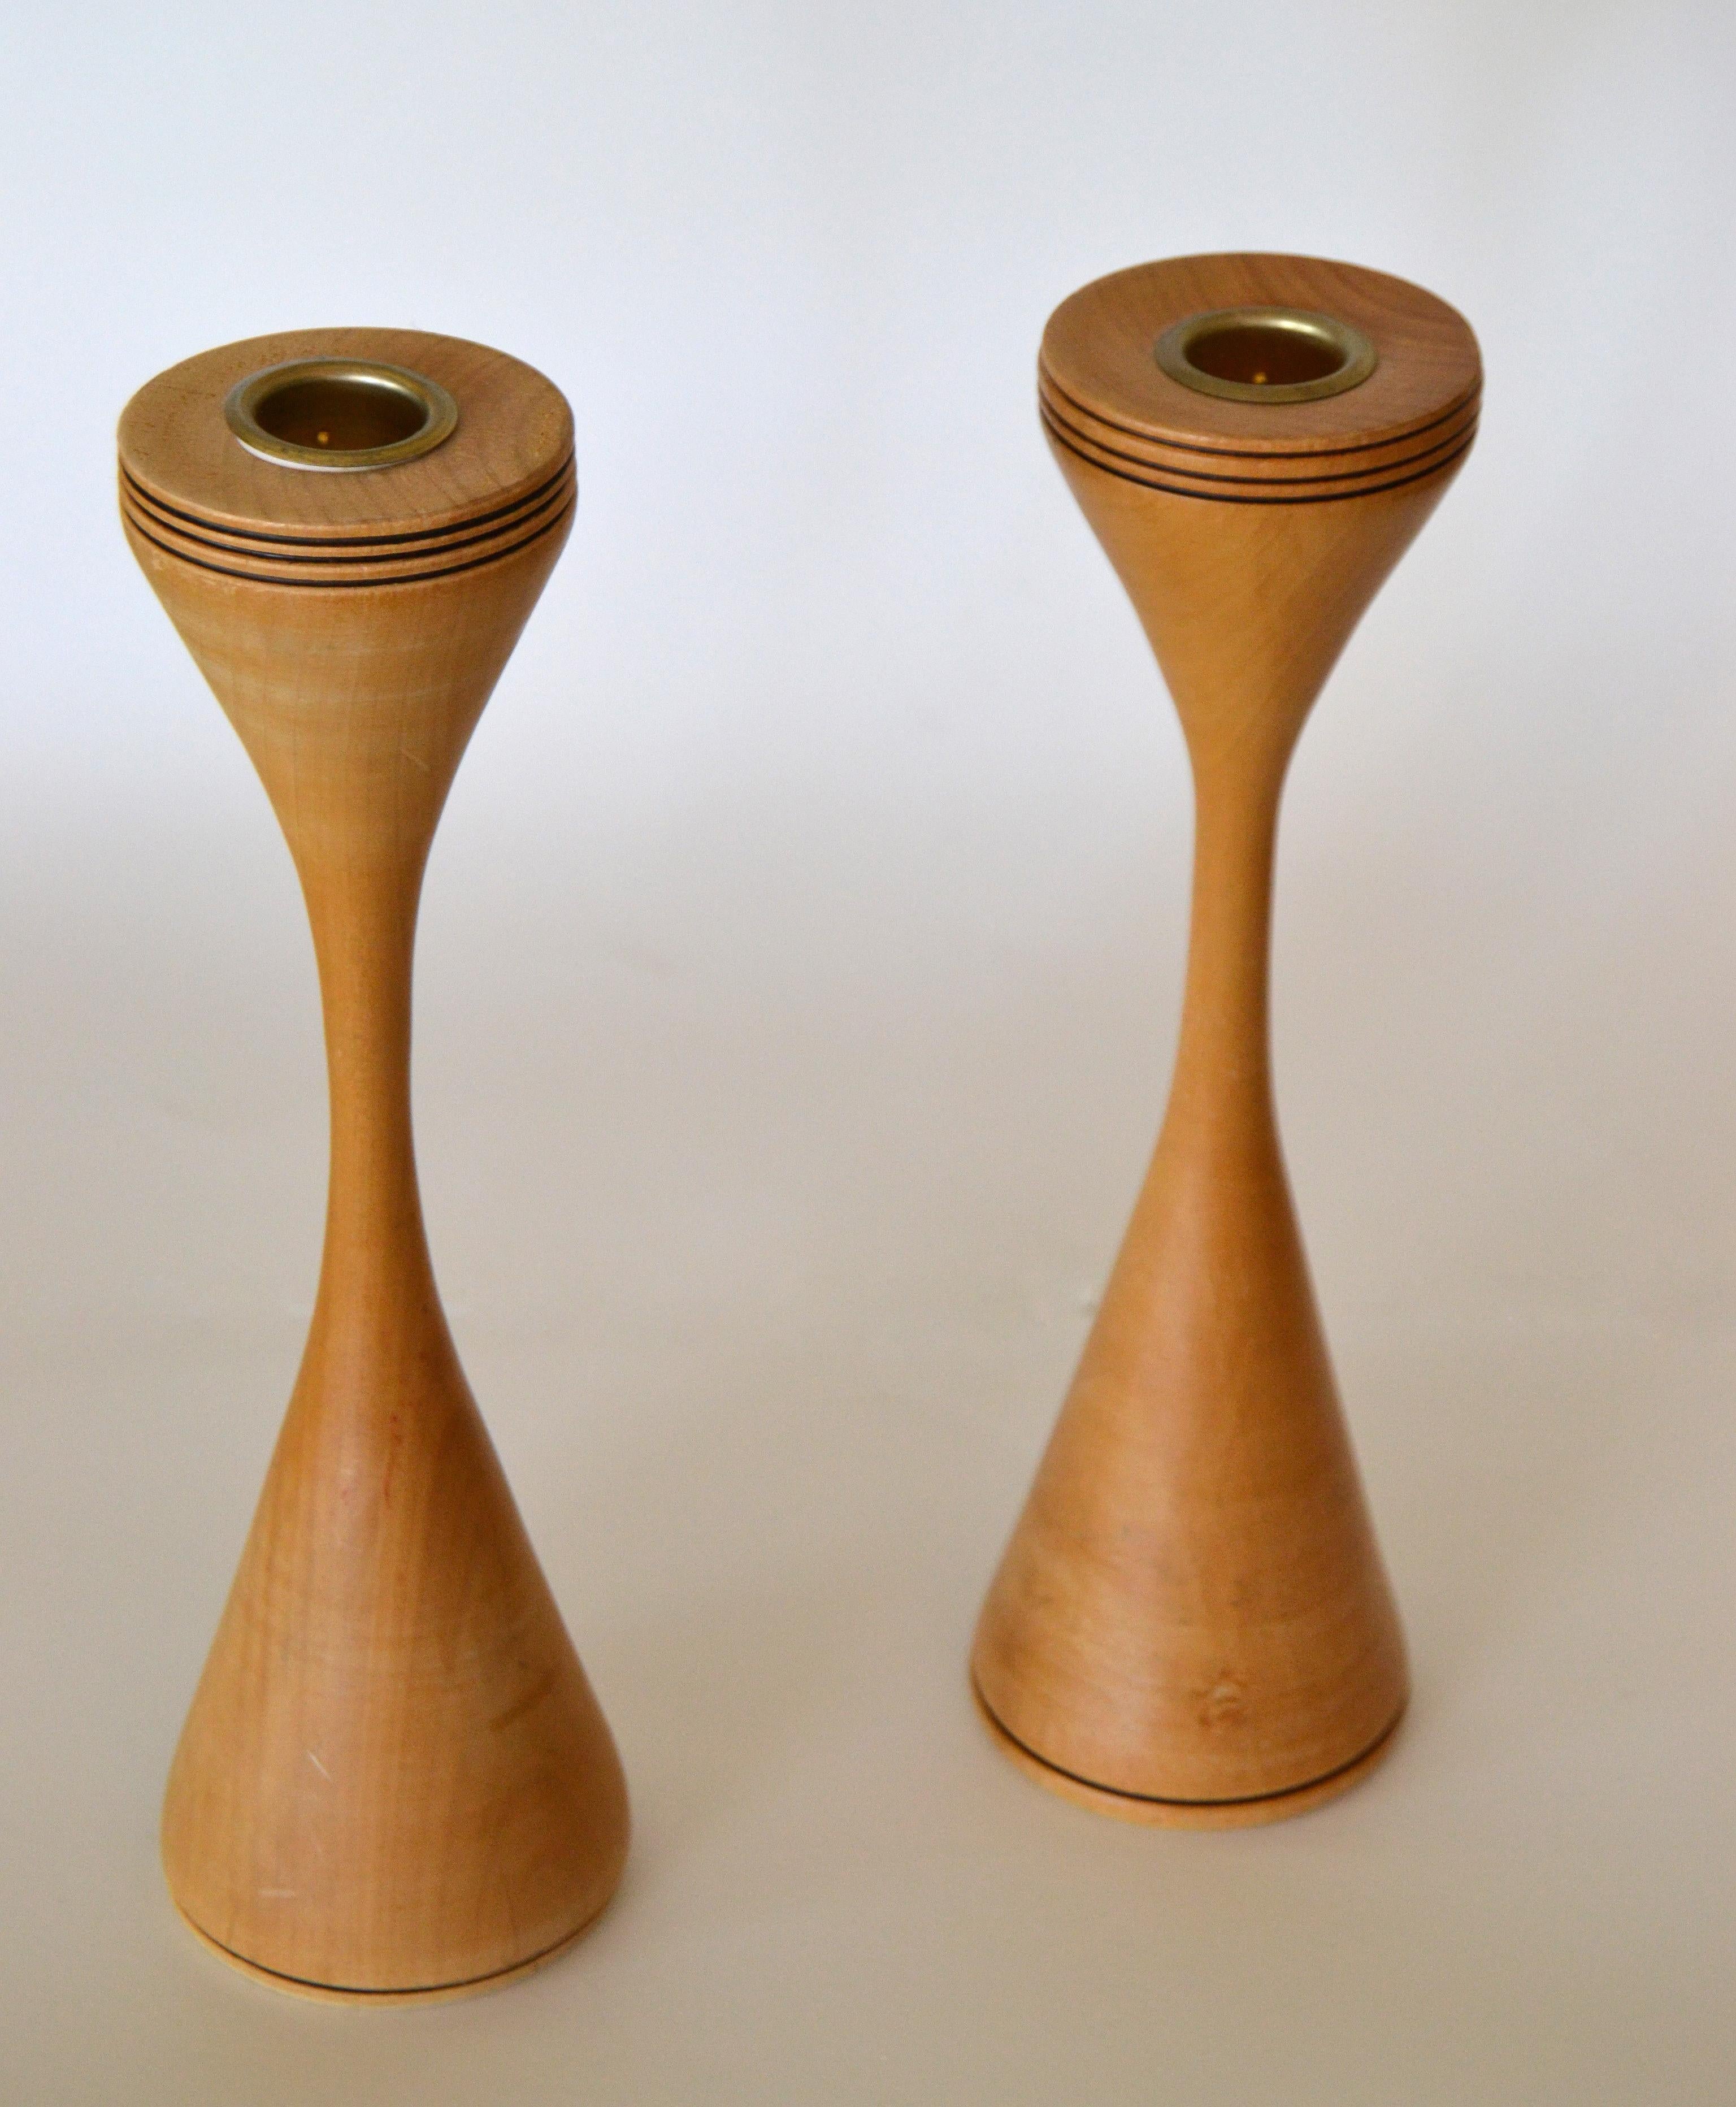 Danish Signed Scandinavian Modern Handcrafted Turned Wood and Brass Candleholders, Pair For Sale